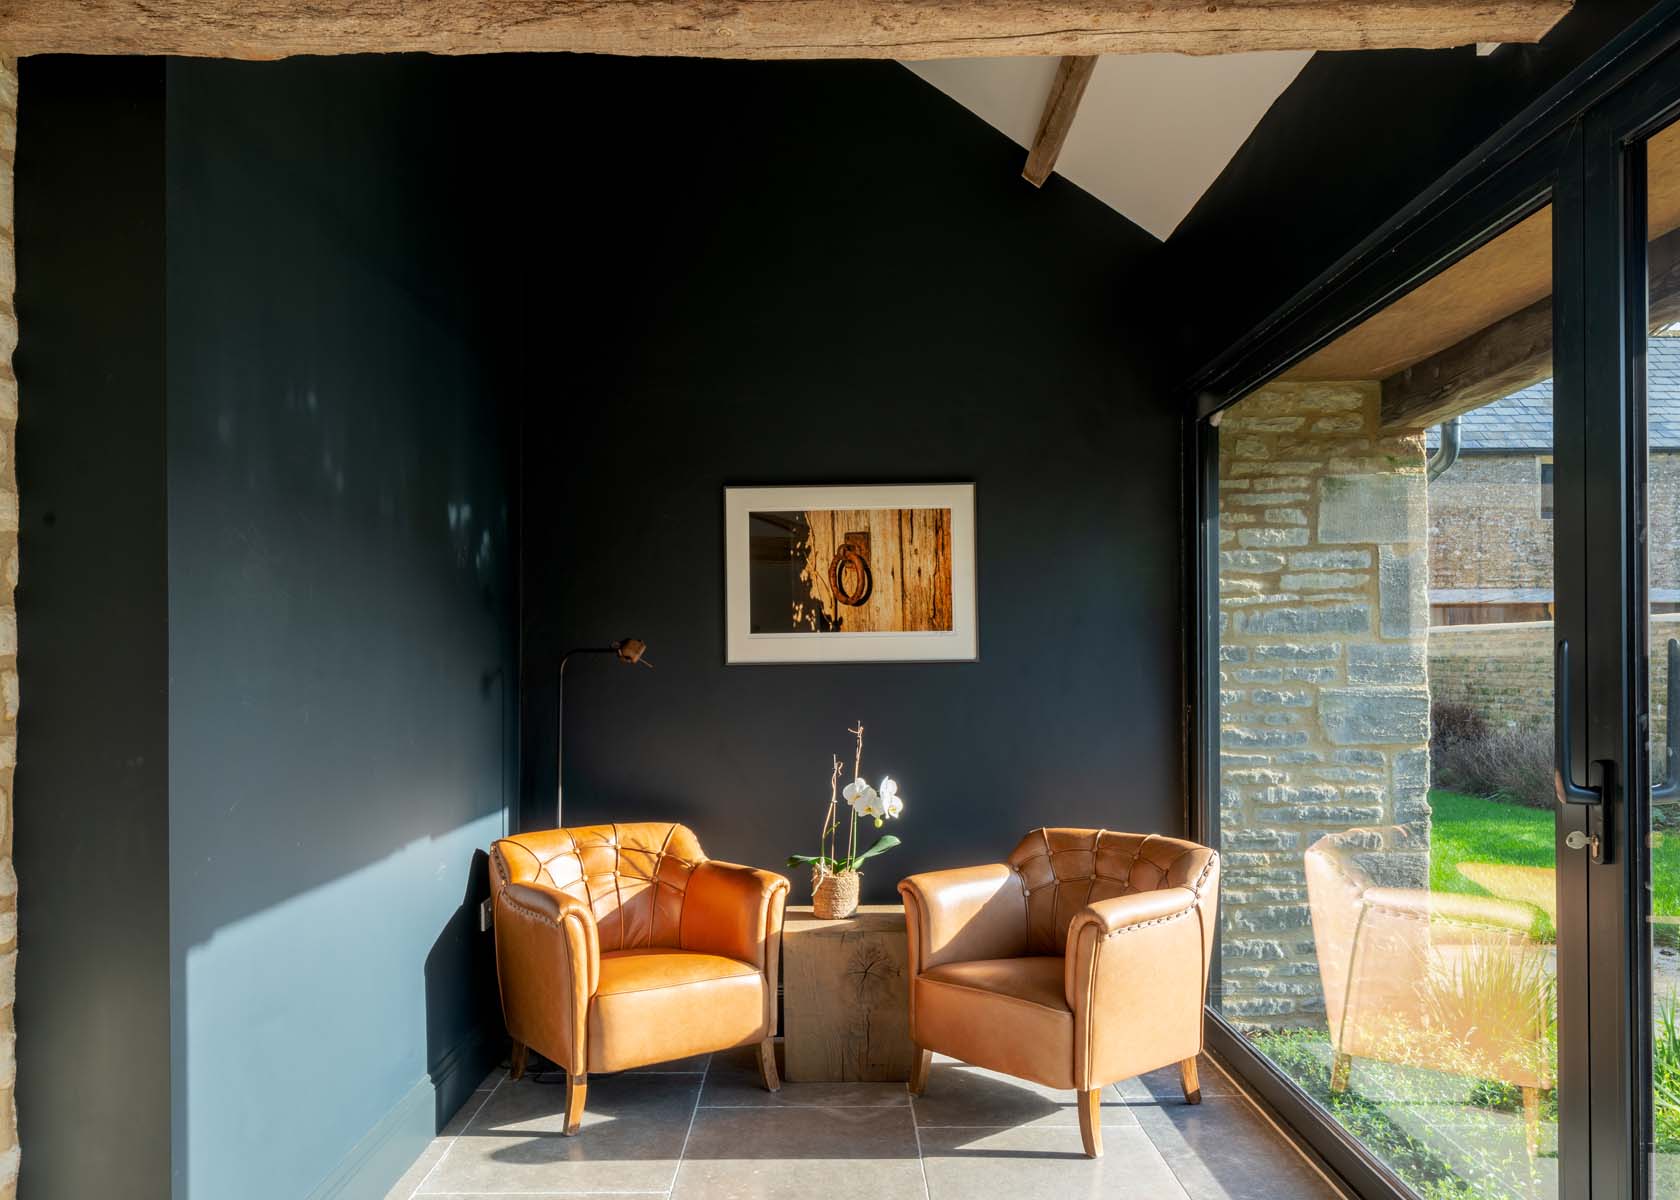 Room with dark green painted walls and tan leather chairs